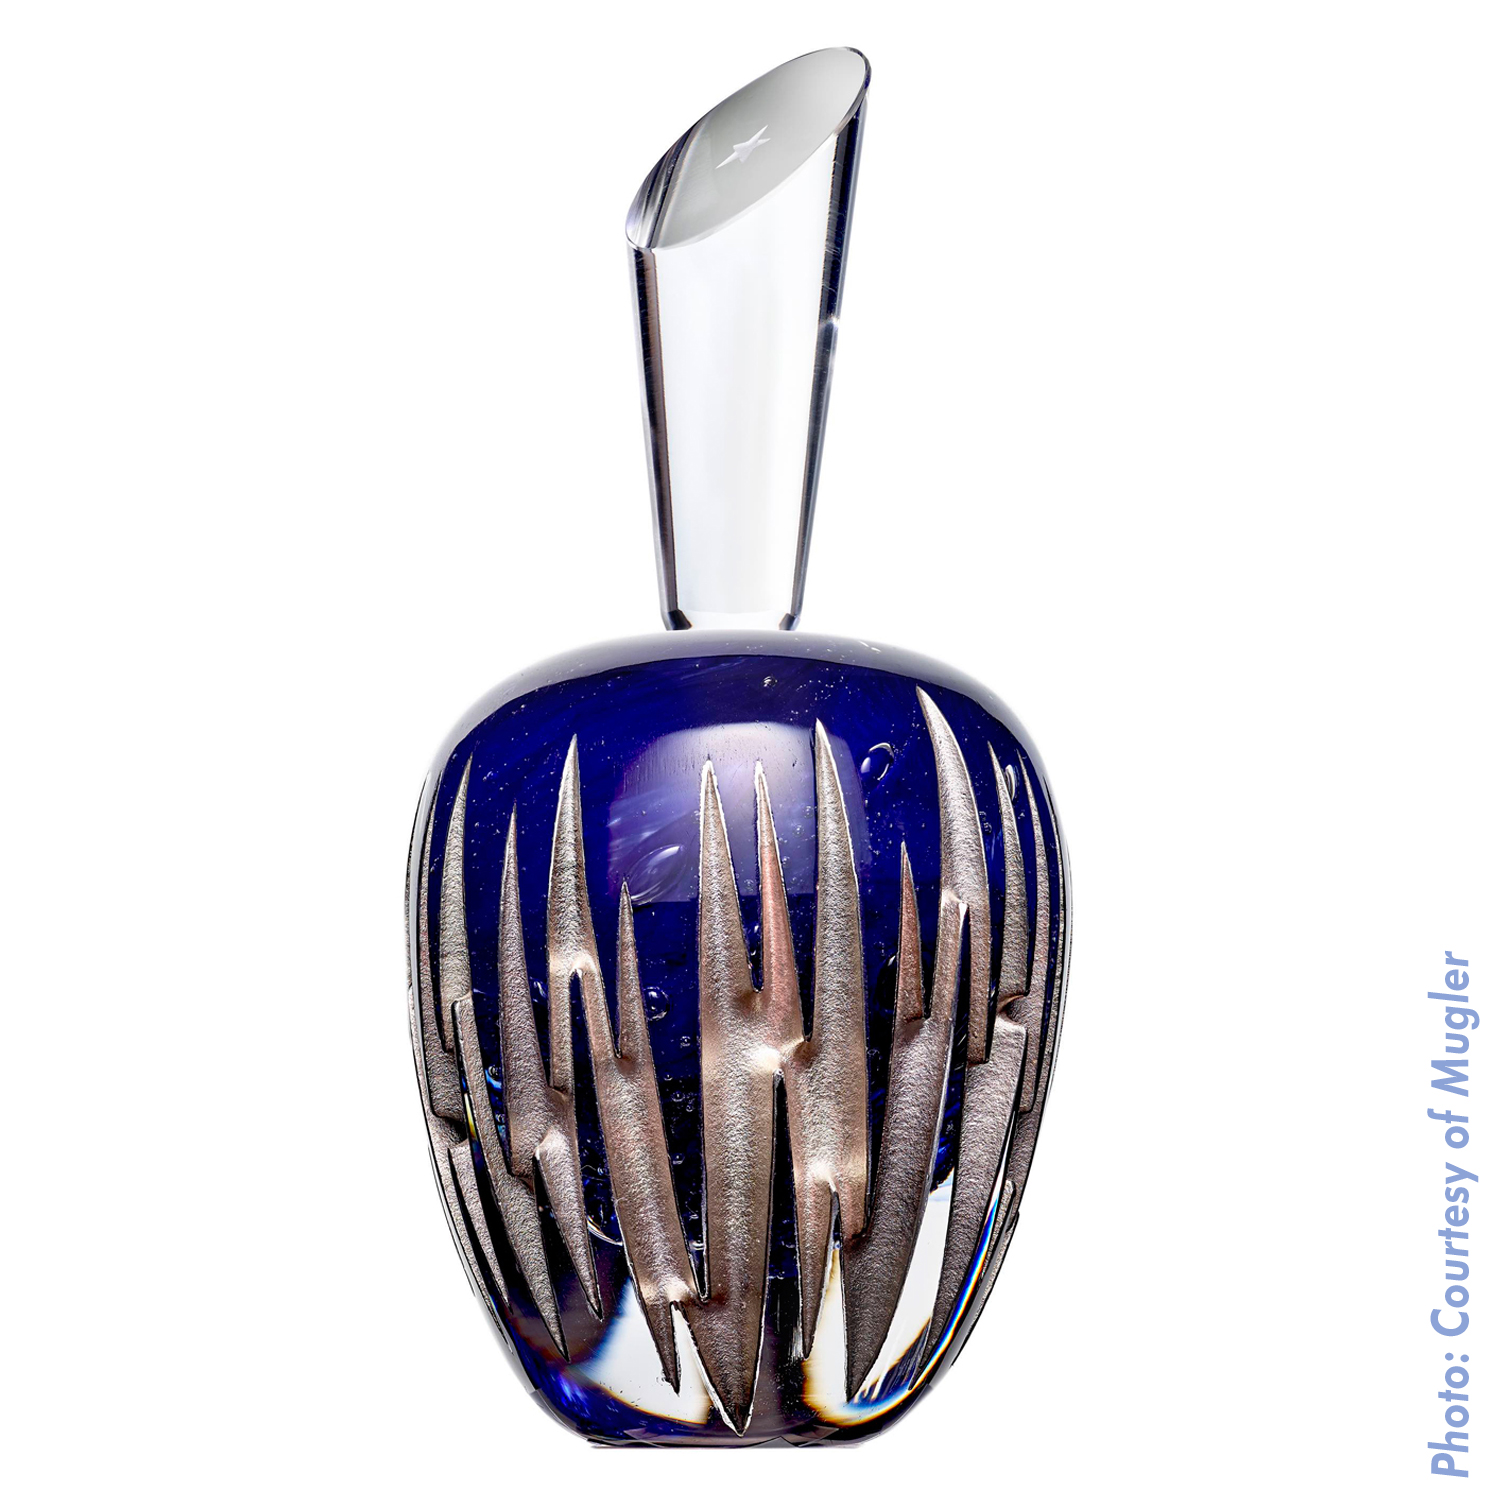 Thierry Mugler Angel Perfume Collector's Limited Edition Bottle 2018 2017 Clouds Cloud Egg Eggs Nuages Unique Art hand Glass Mouthblown Jean-Jacques Urcun Frederic Alary Blue Silver Sapphire Spears